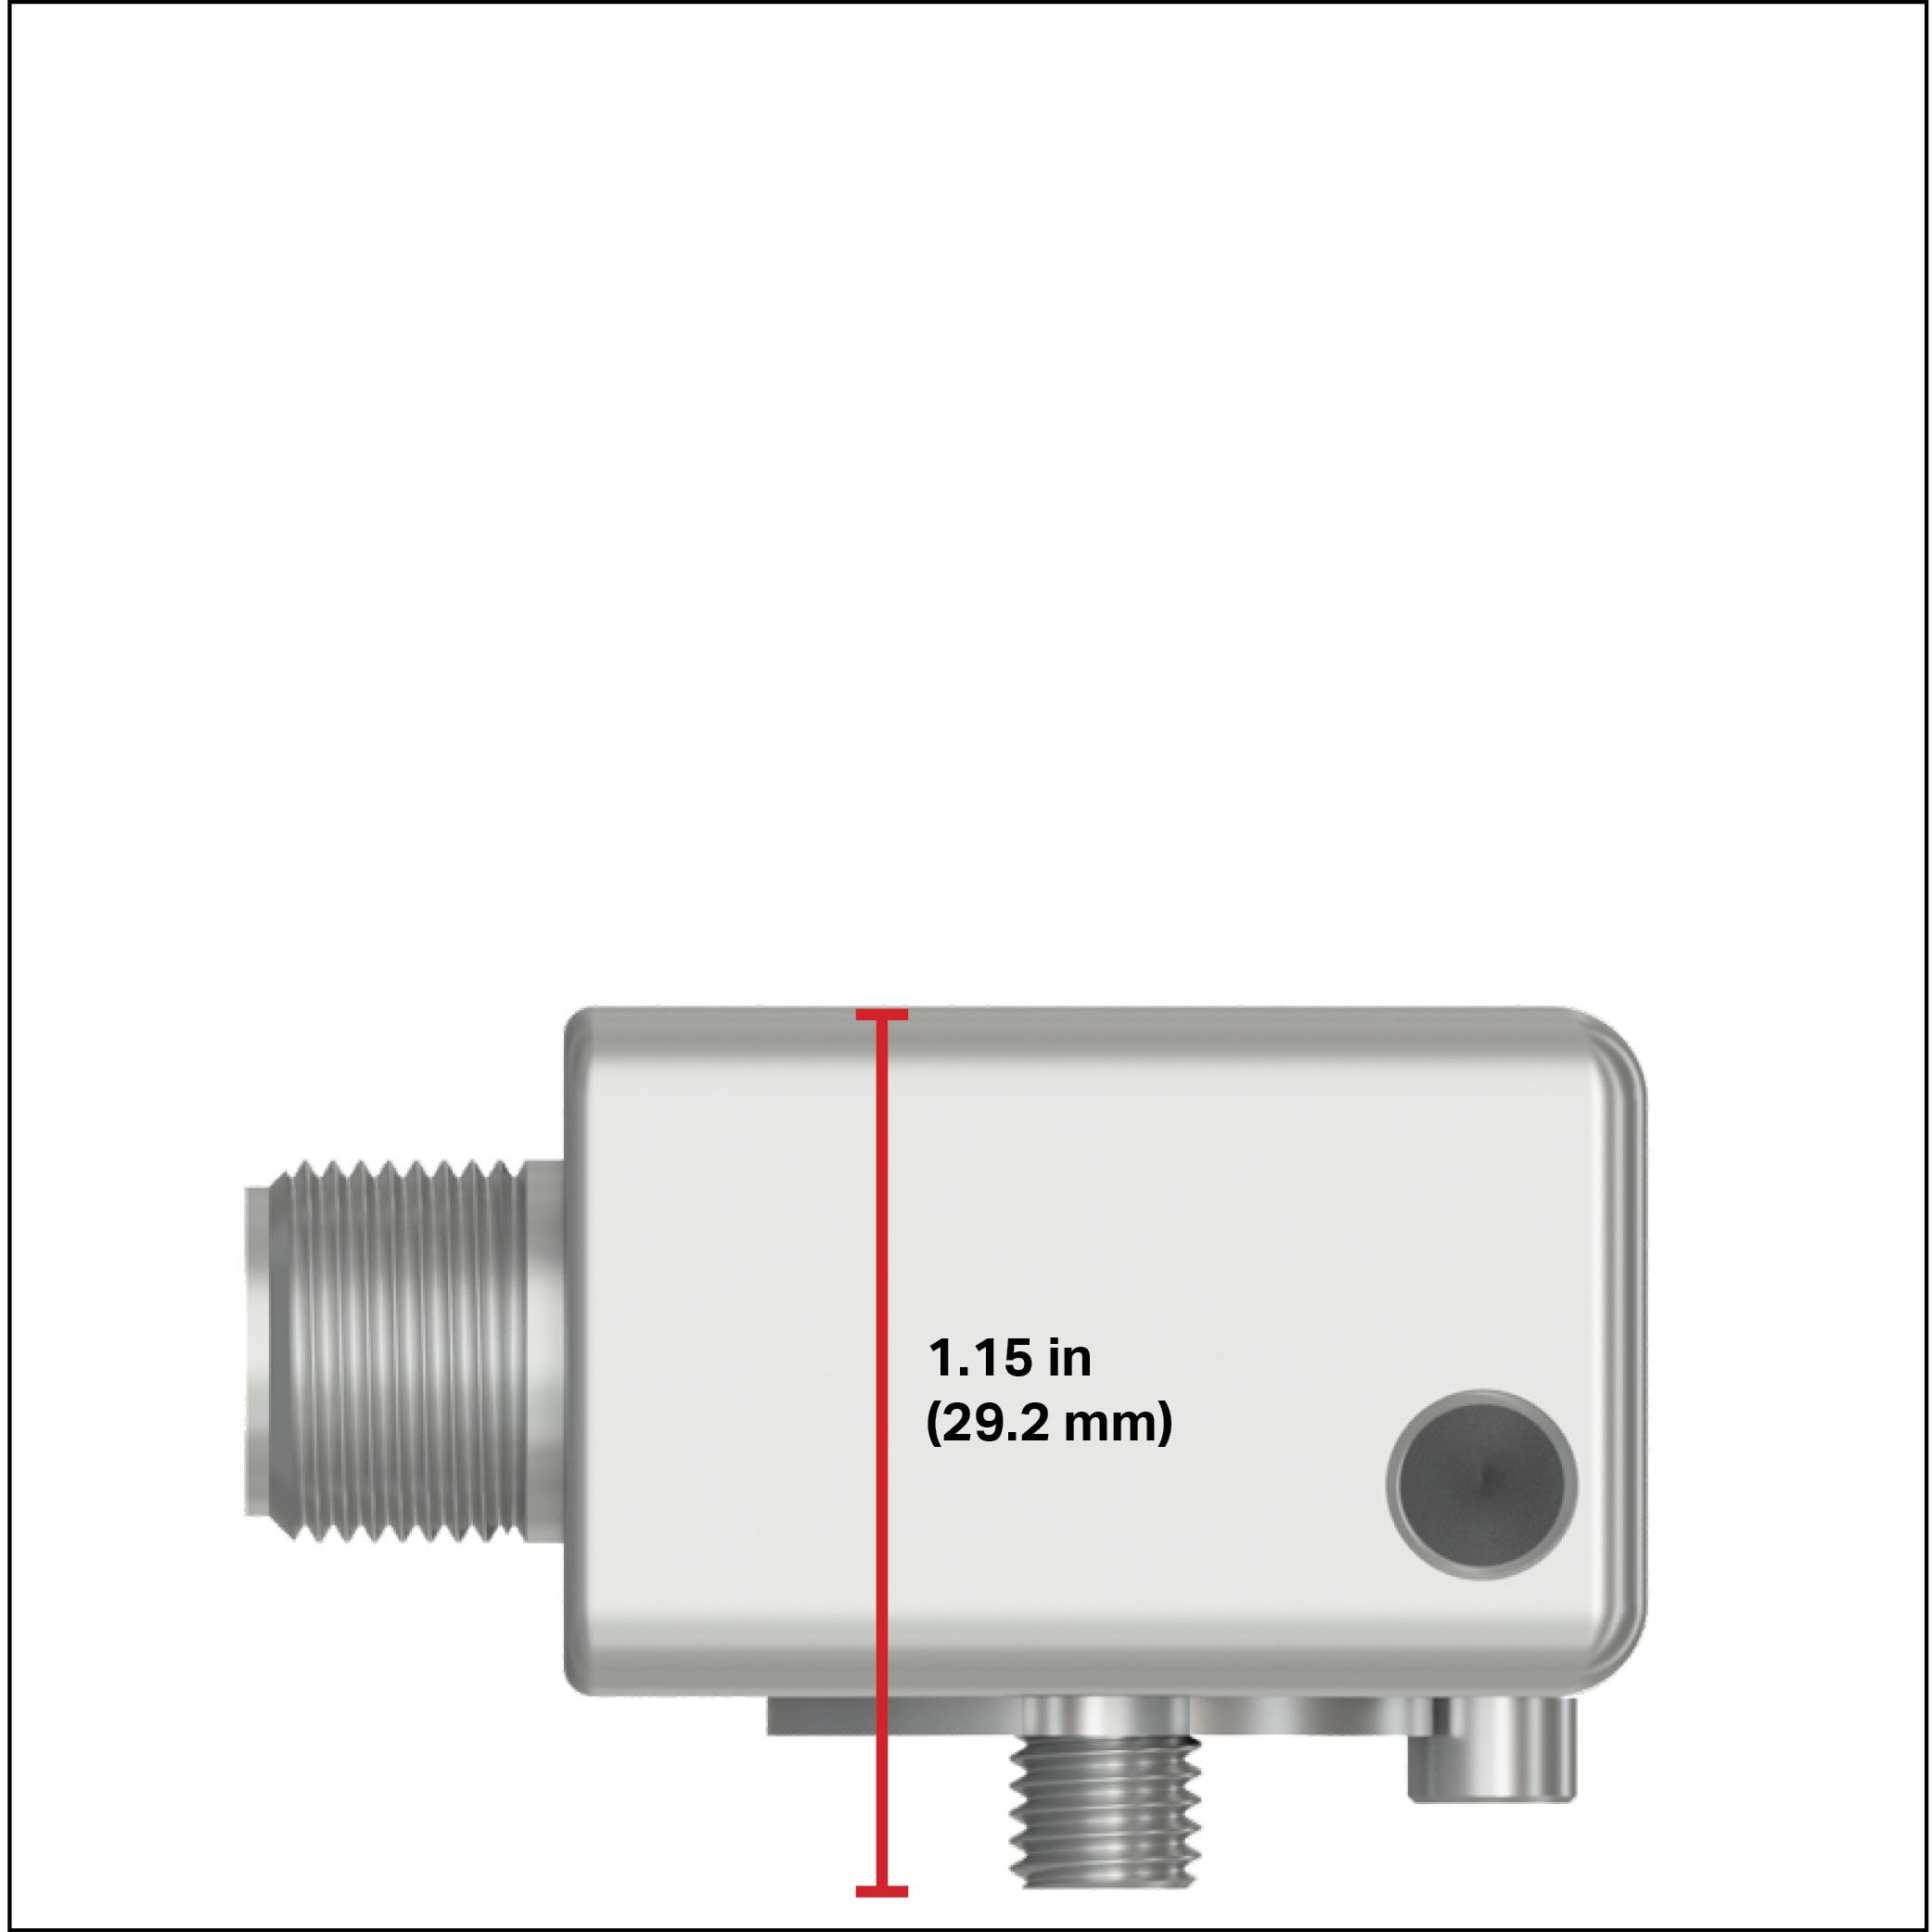 CTC legacy side exit triaxial accelerometer with a red measurement line showing a height of 1.15 inches (29.2 millimeters)